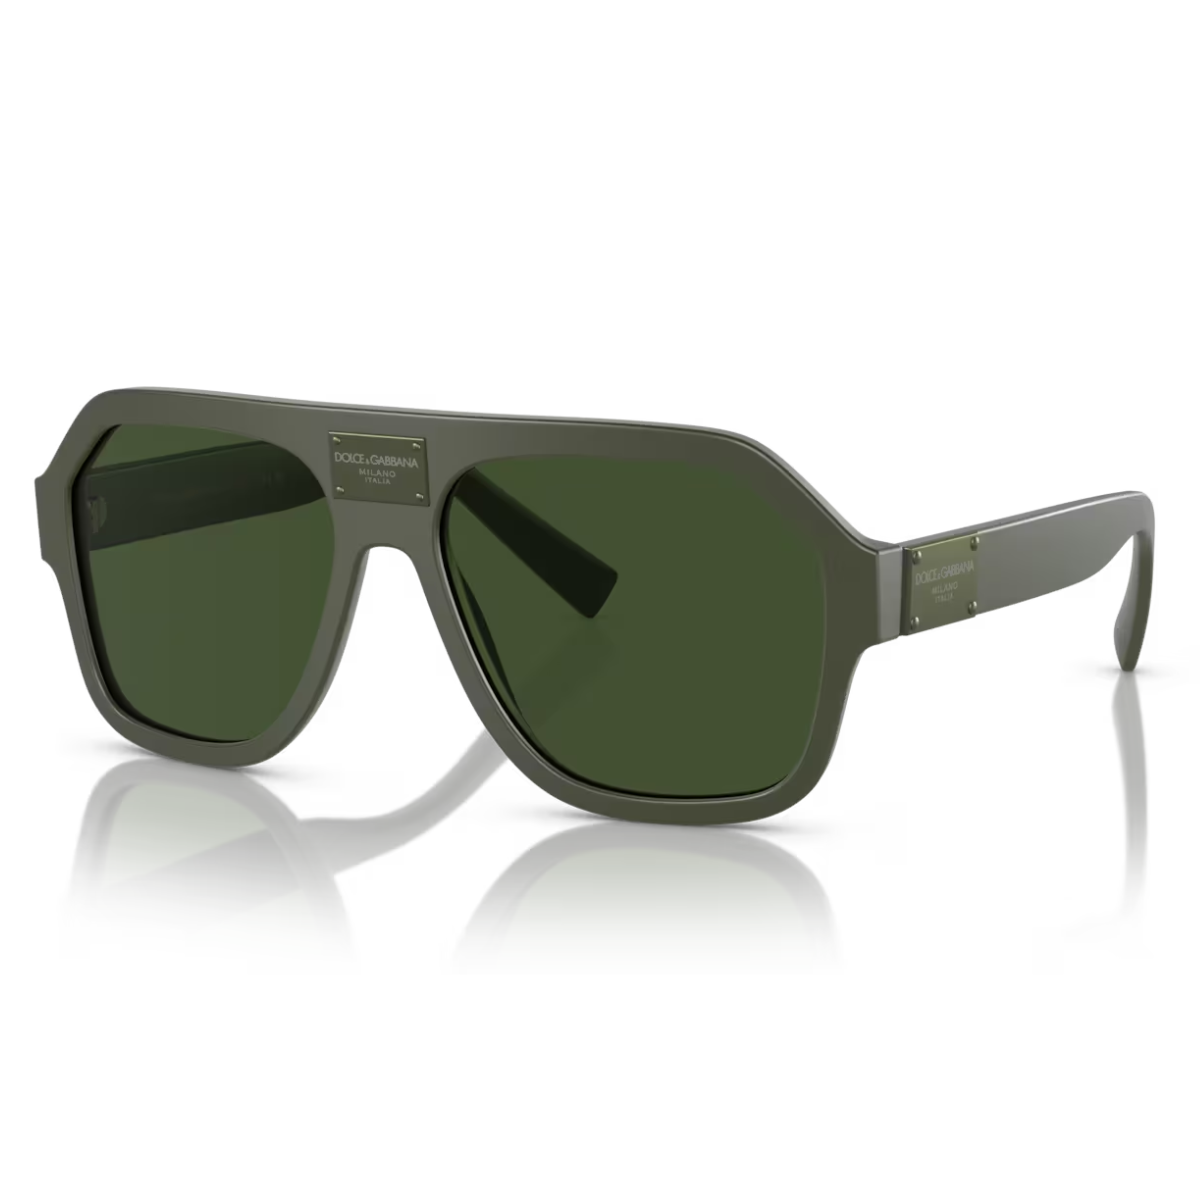 "Discover fashionable aviator-shaped sunglasses with the Dolce & Gabbana DG2174 02/96 design, now at Optorium."